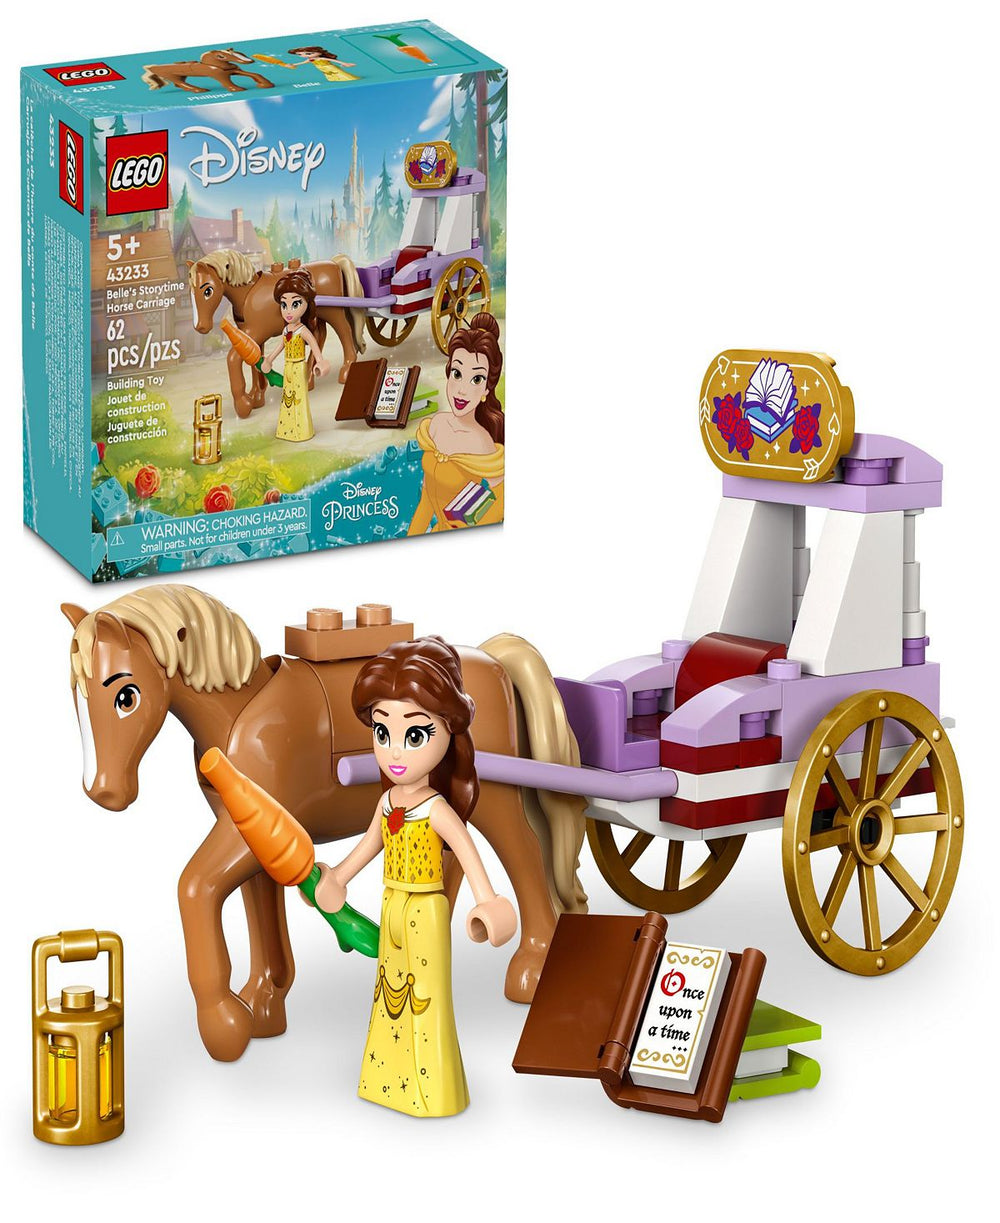 LEGO Disney Princess Belle's Storytime Carriage Set 43233 with Minifigure - 62 Pieces